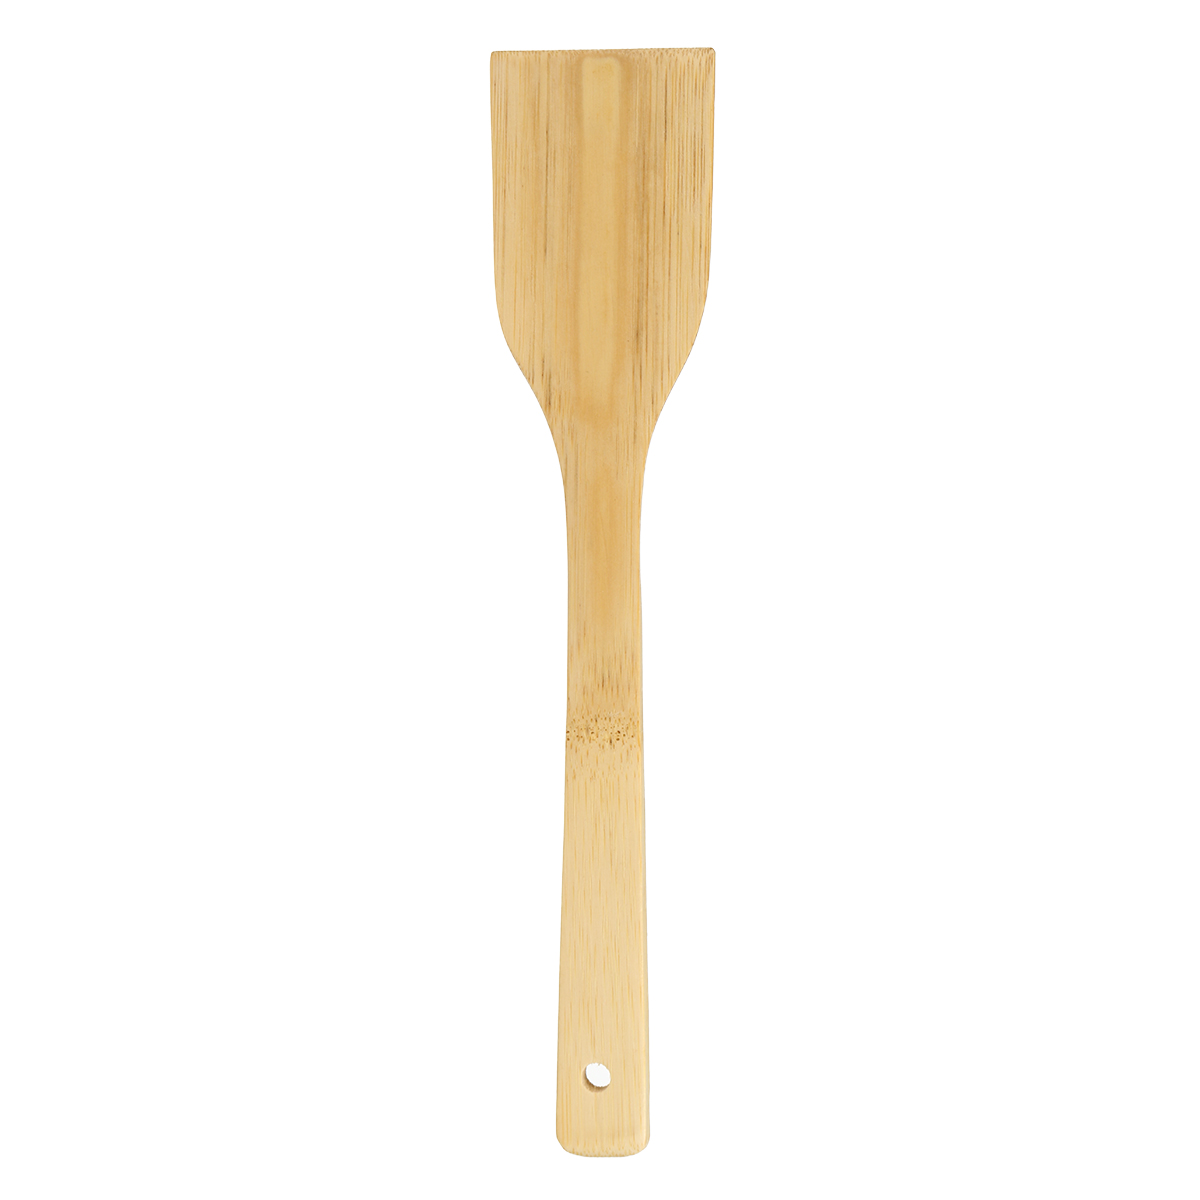 8PCS-Bamboo-Nonstick-Cooking-Utensils-Wooden-Spoons-and-Spatula-Utensil-Set-1680404-10